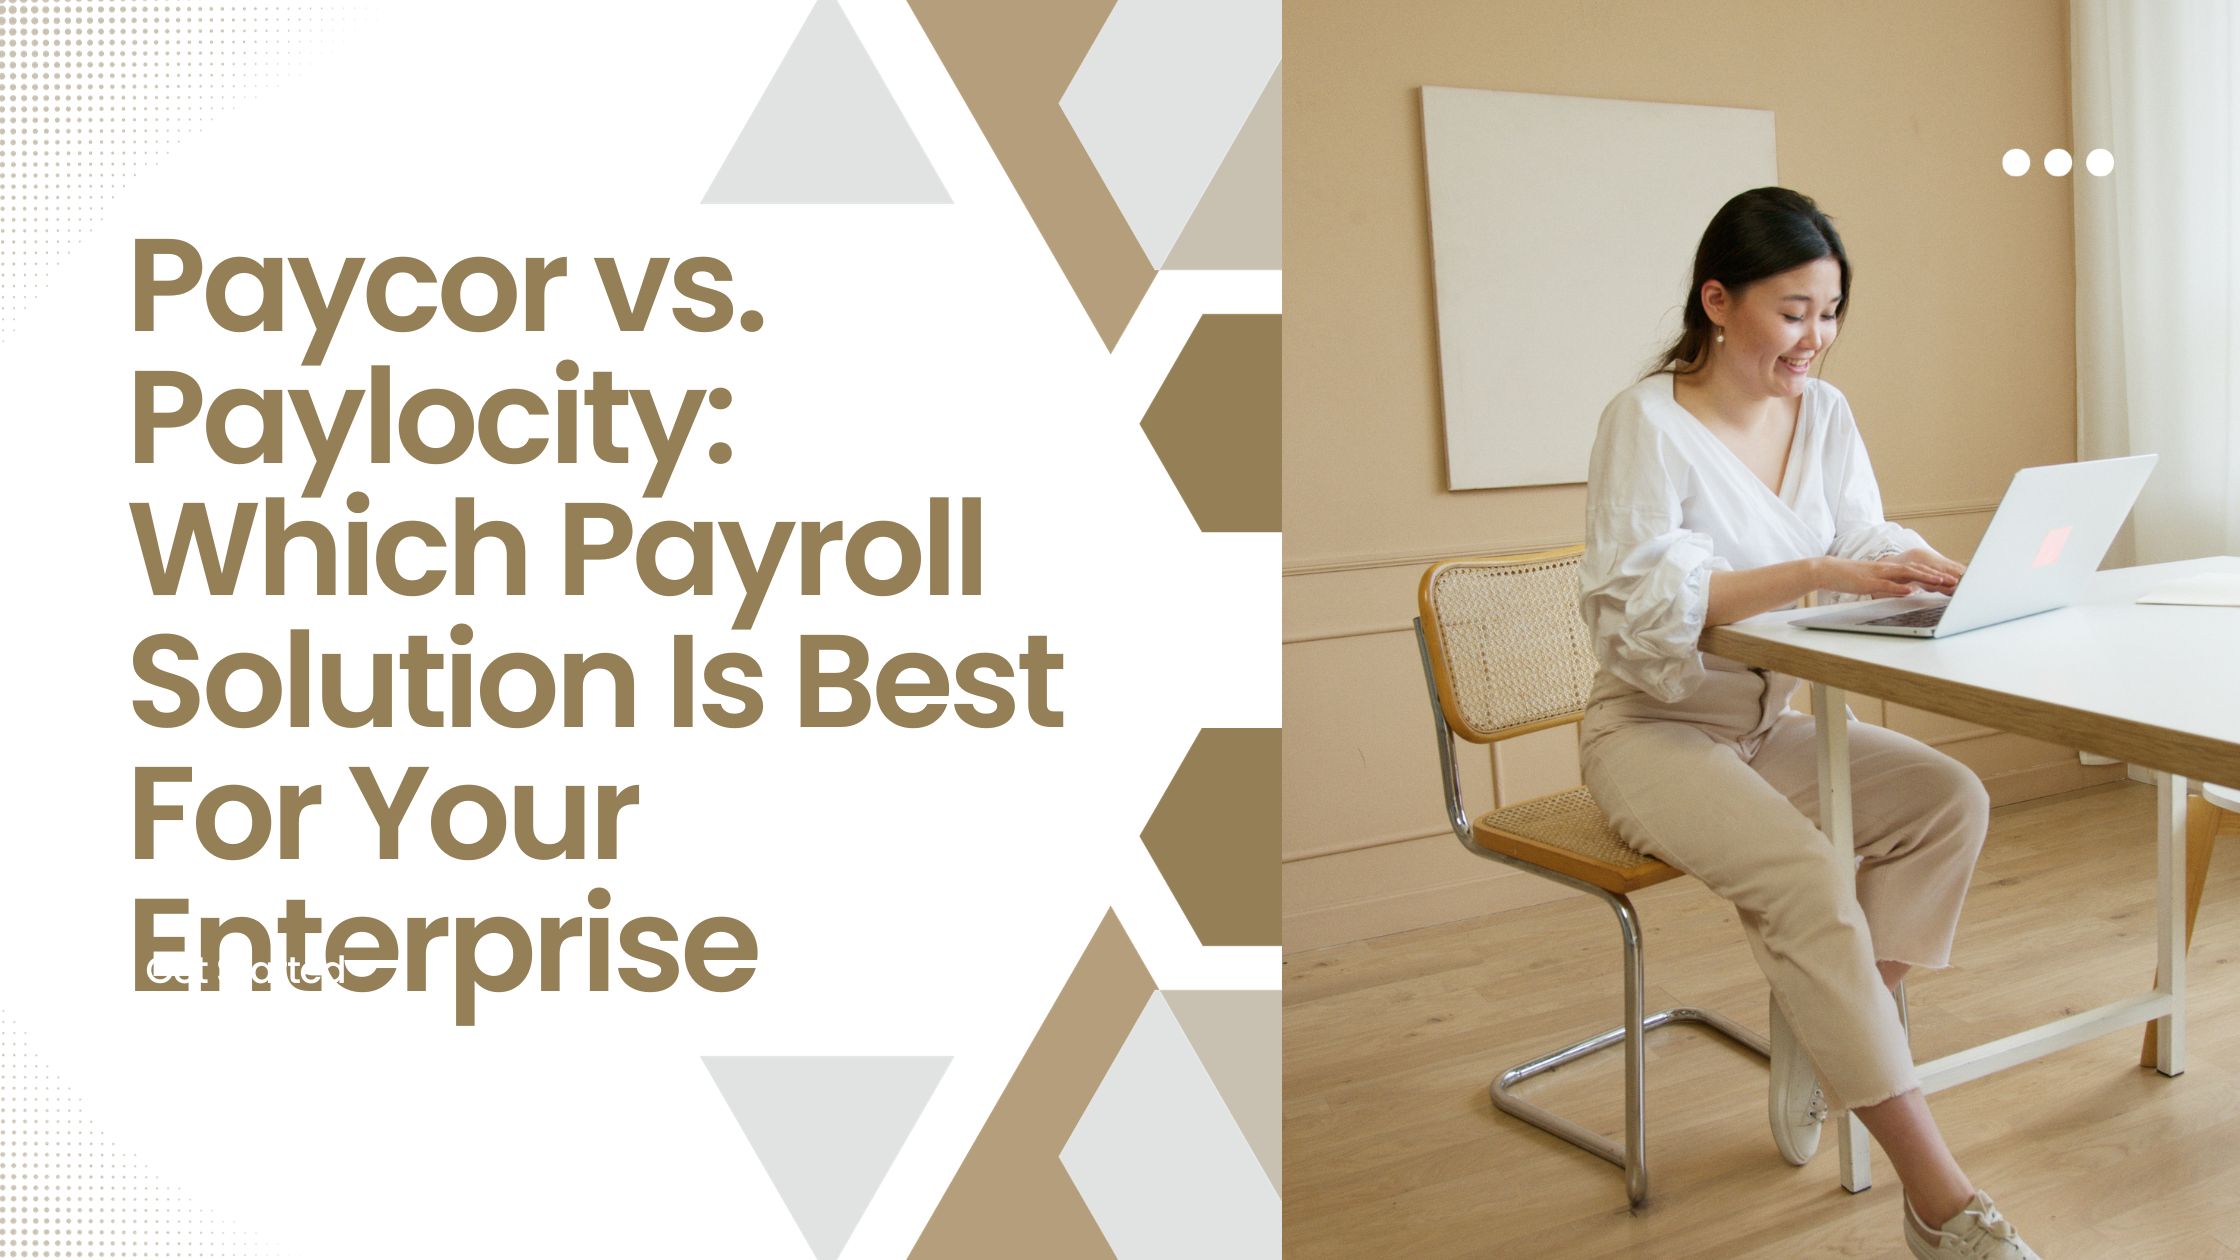 Paycor vs. Paylocity Which Payroll Solution Is Best For Your Enterprise